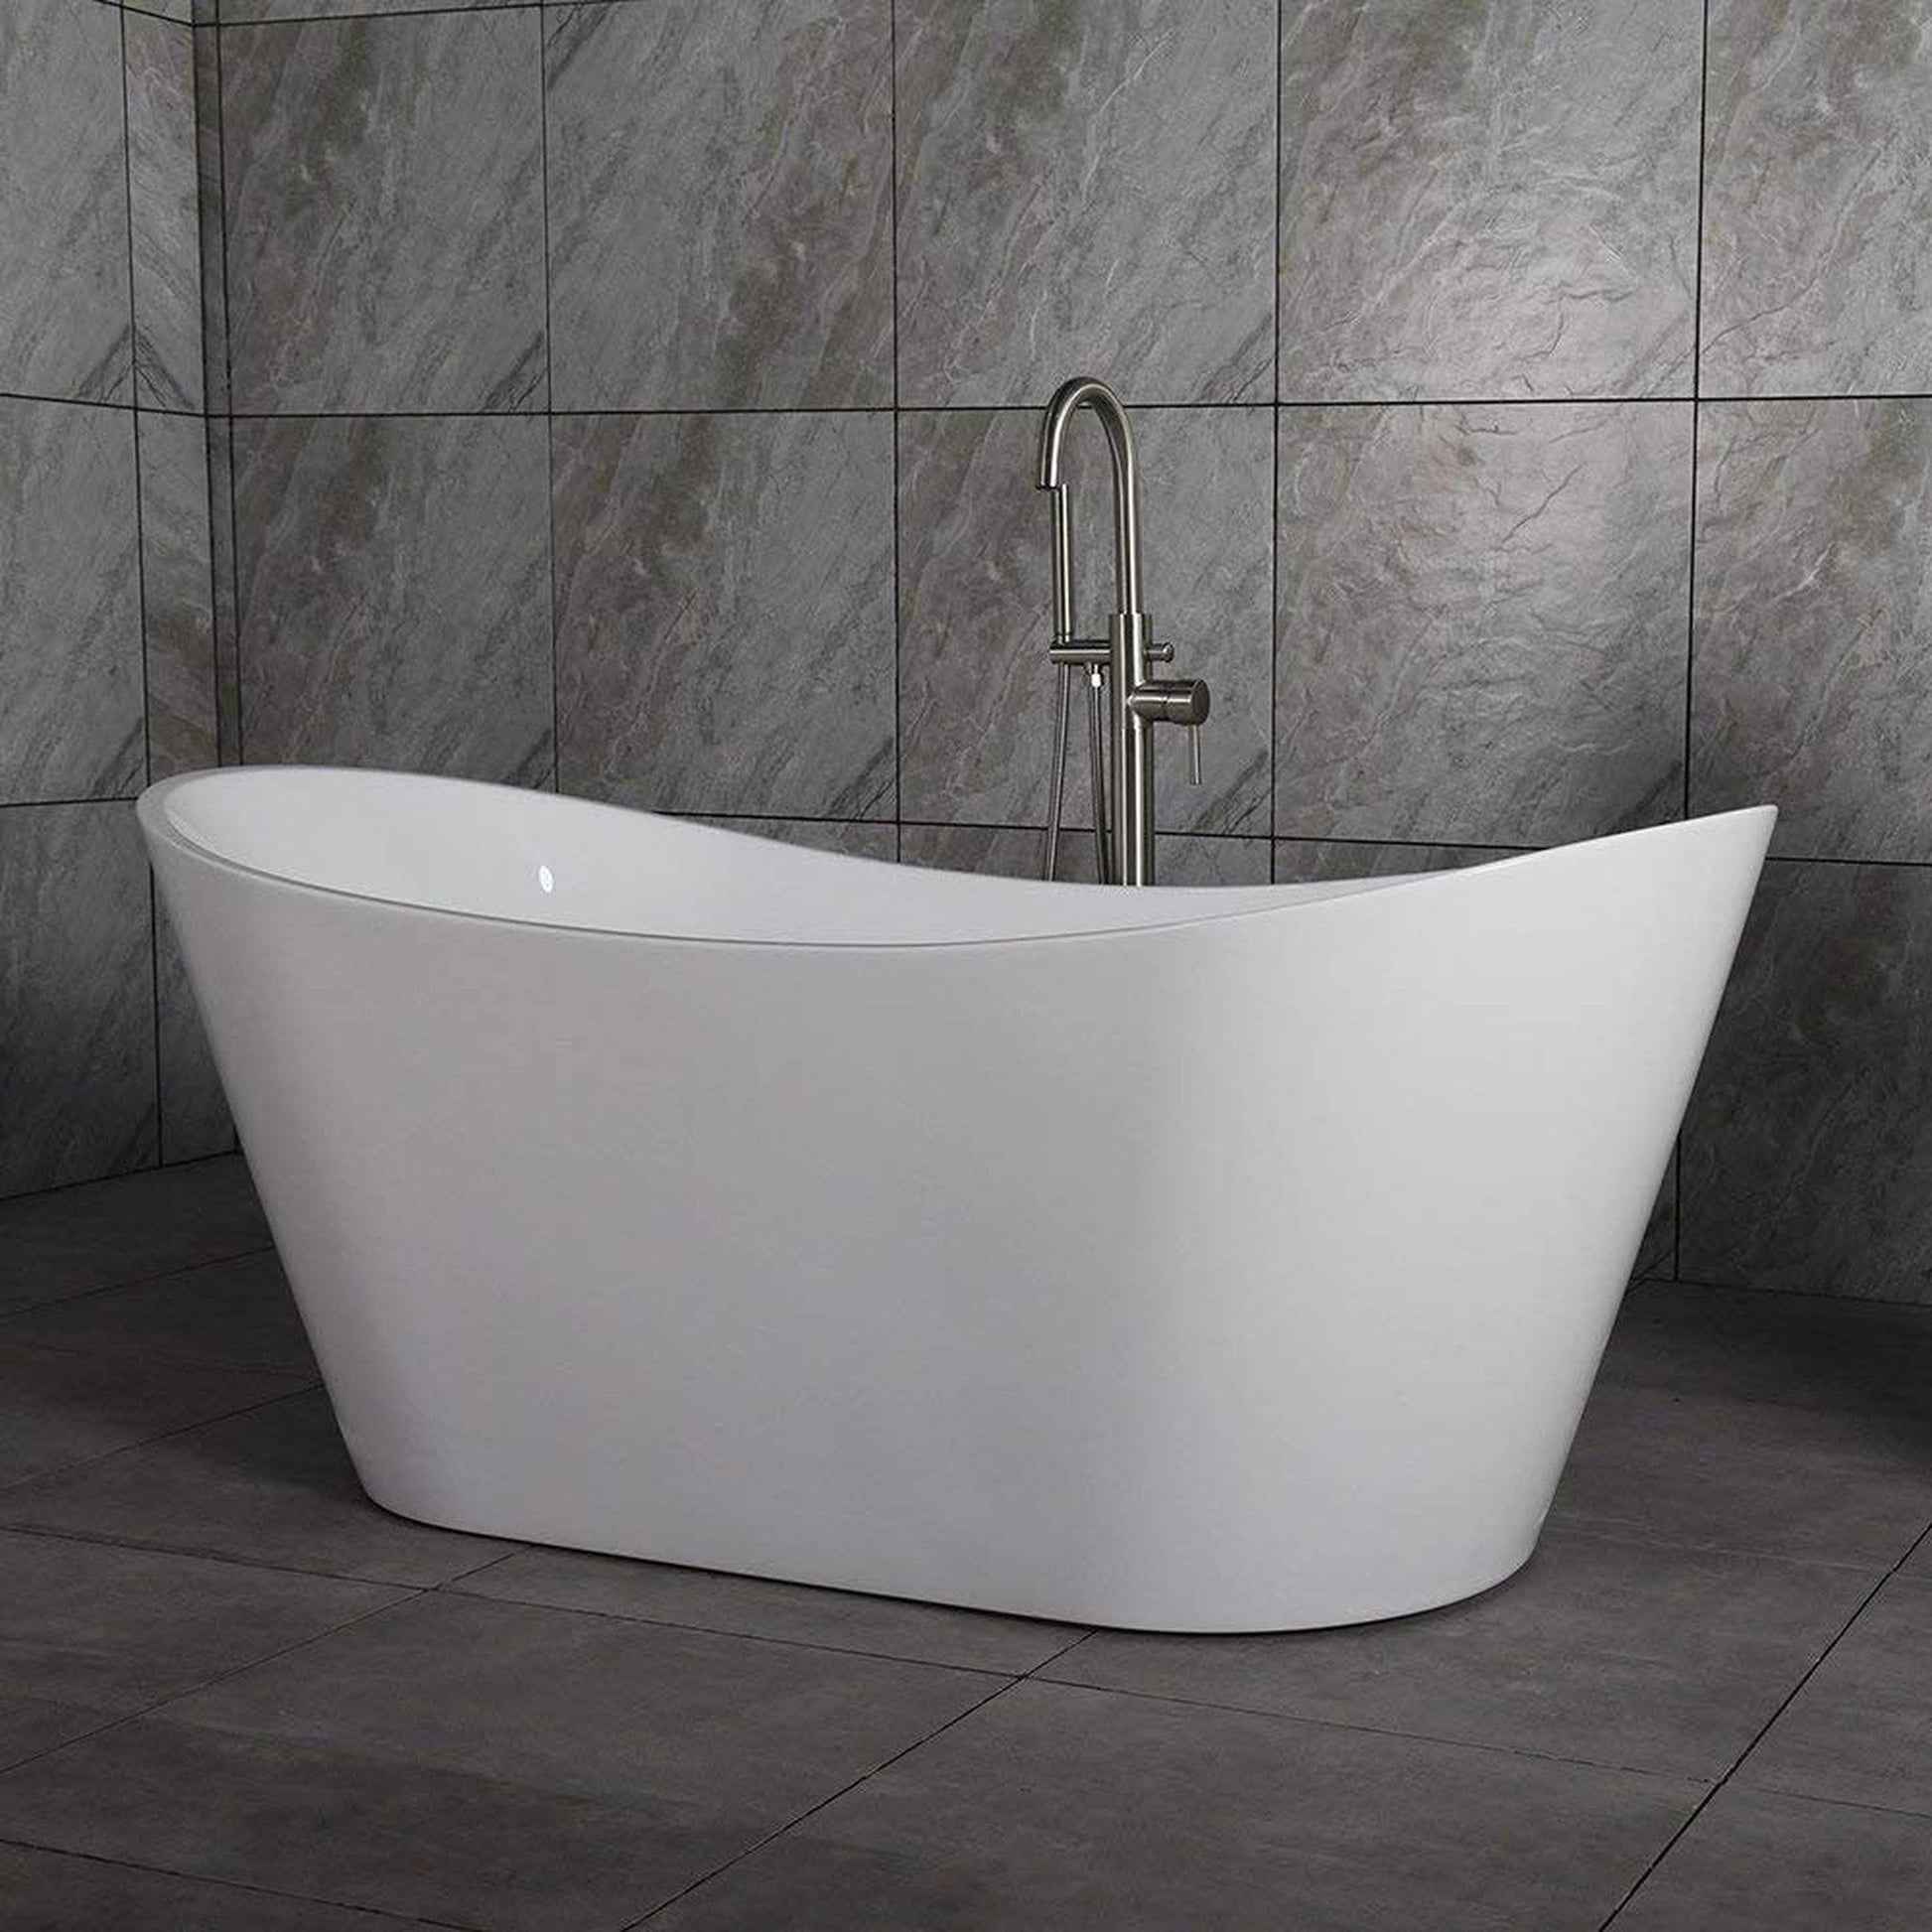 WoodBridge B0010 67" White Acrylic Freestanding Contemporary Soaking Bathtub With Brushed Nickel Drain, Overflow, F0001BNSQ Tub Filler and Caddy Tray